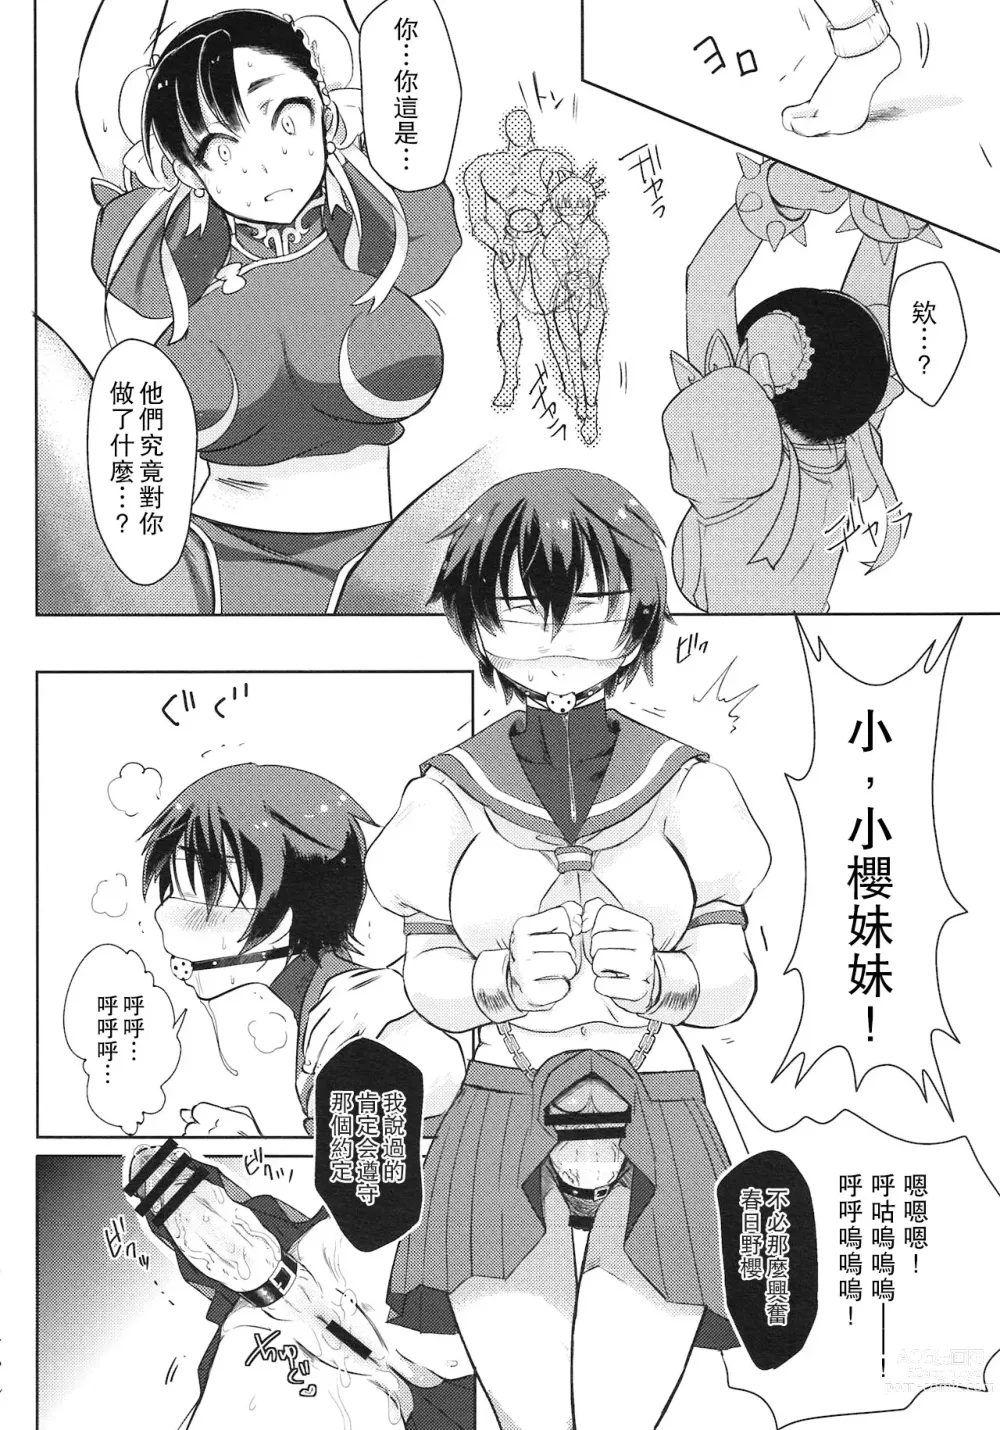 Page 9 of doujinshi 扶她行動